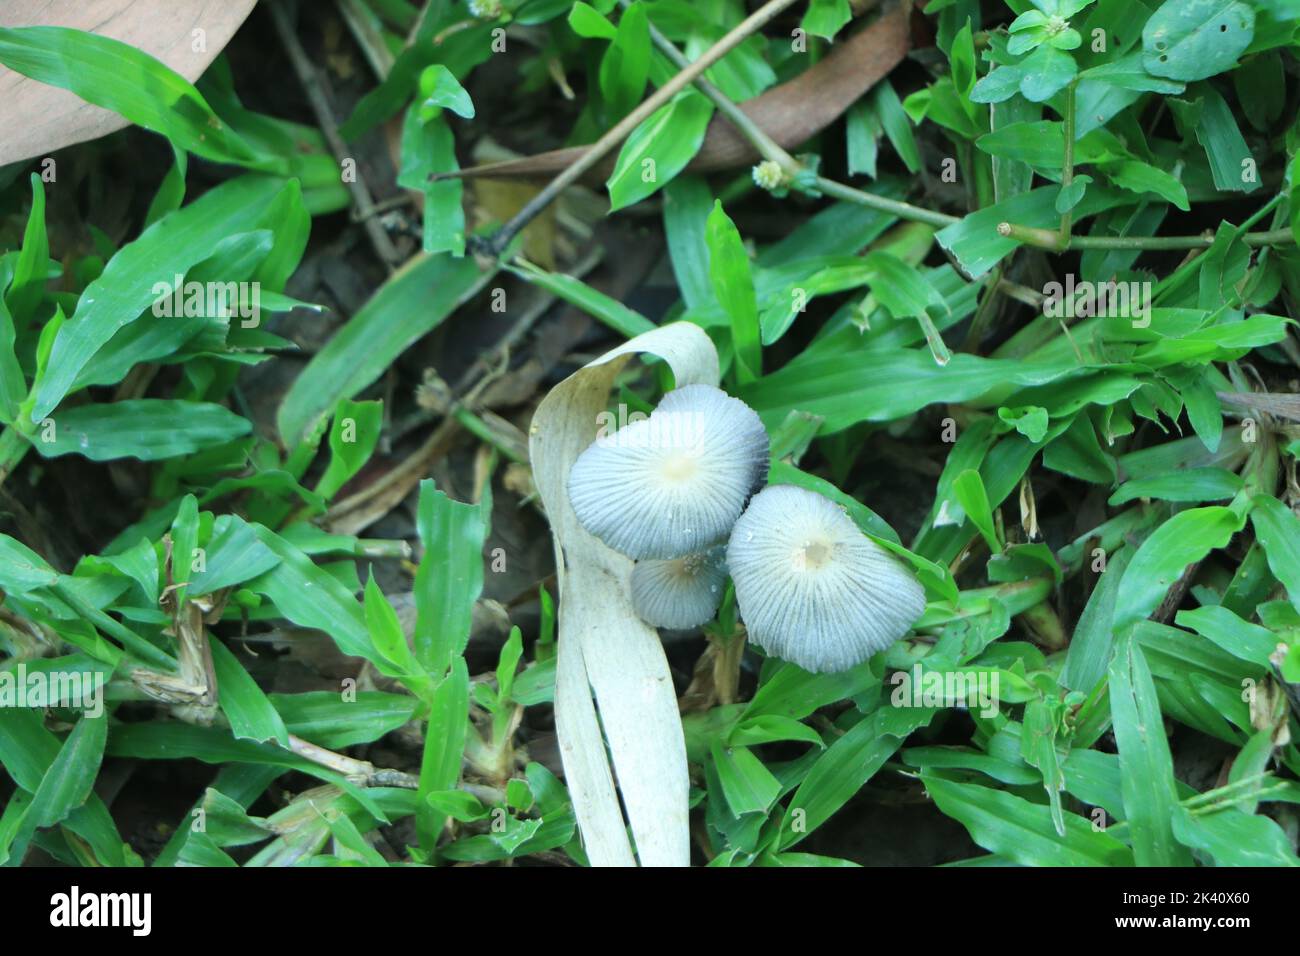 small inedible mushrooms, poisonous mushrooms forest background macro nature wild Stock Photo